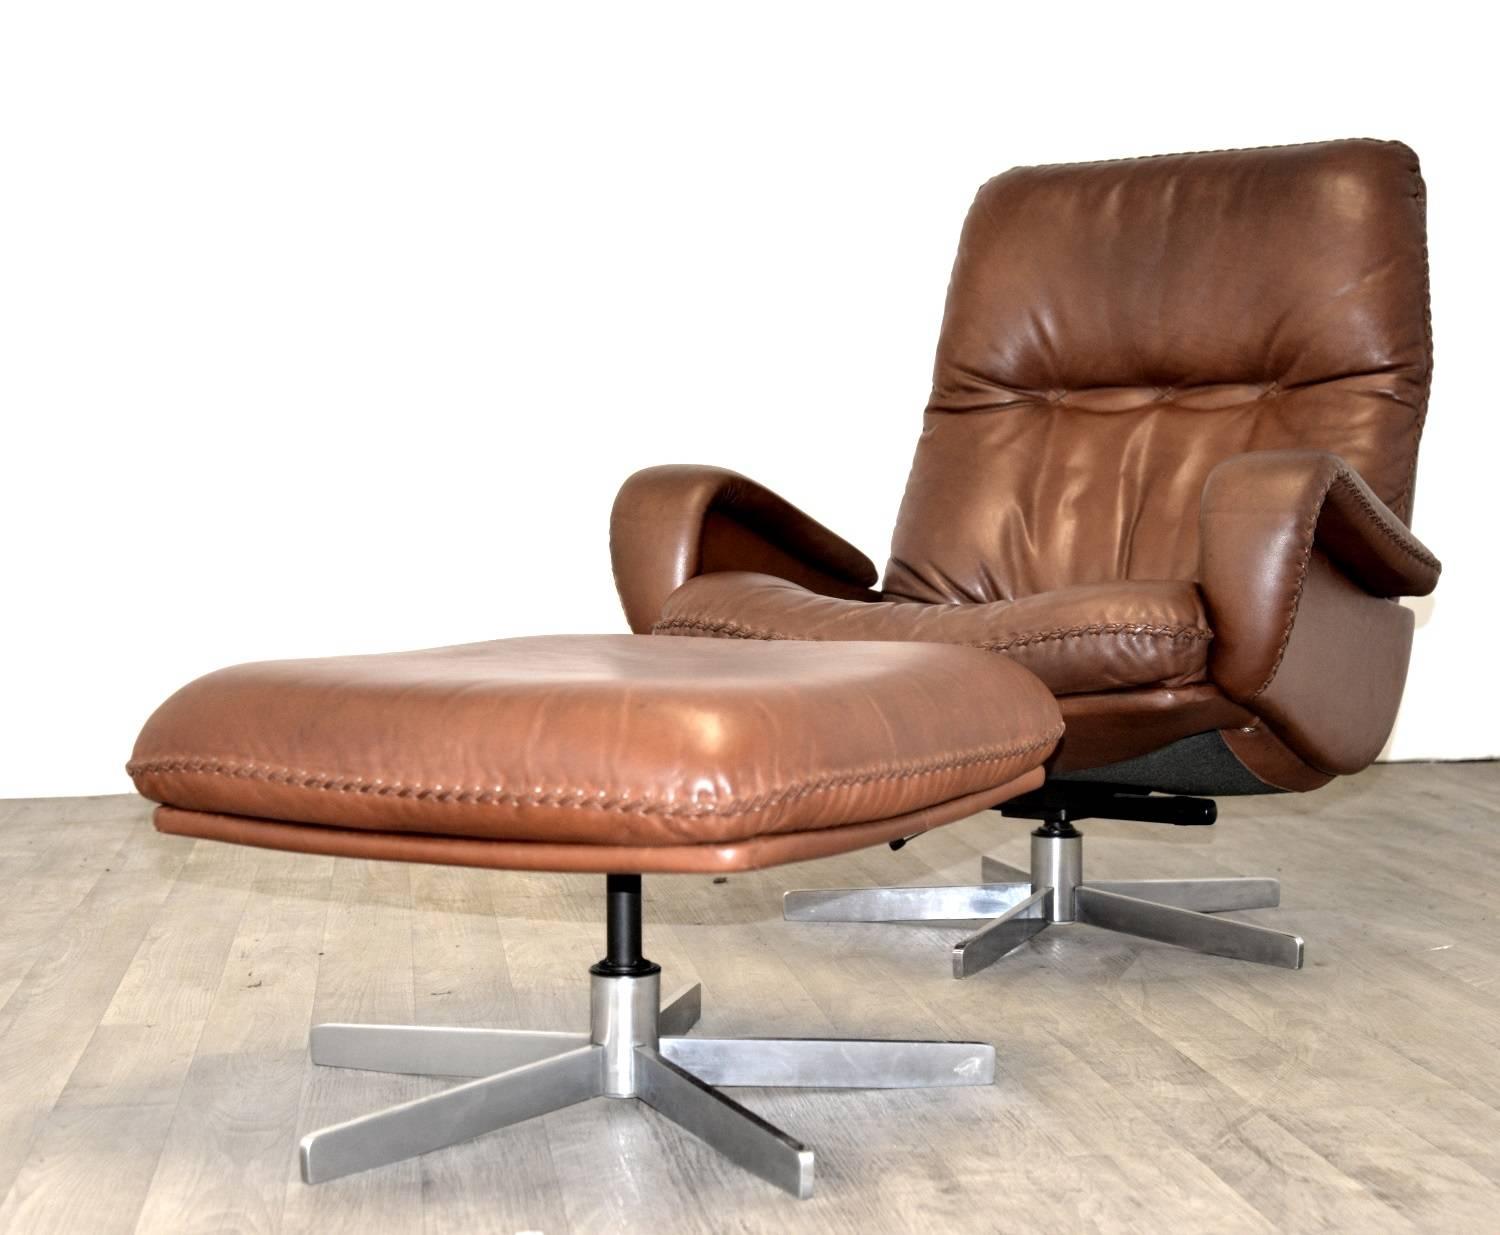 Discounted airfreight for our US and International customers (from 2 weeks door to door)

We bring to you an ultra rare and highly desirable De Sede S 231 vintage lounge swivel armchair and ottoman. Hand built in the late 1960s by De Sede craftsman